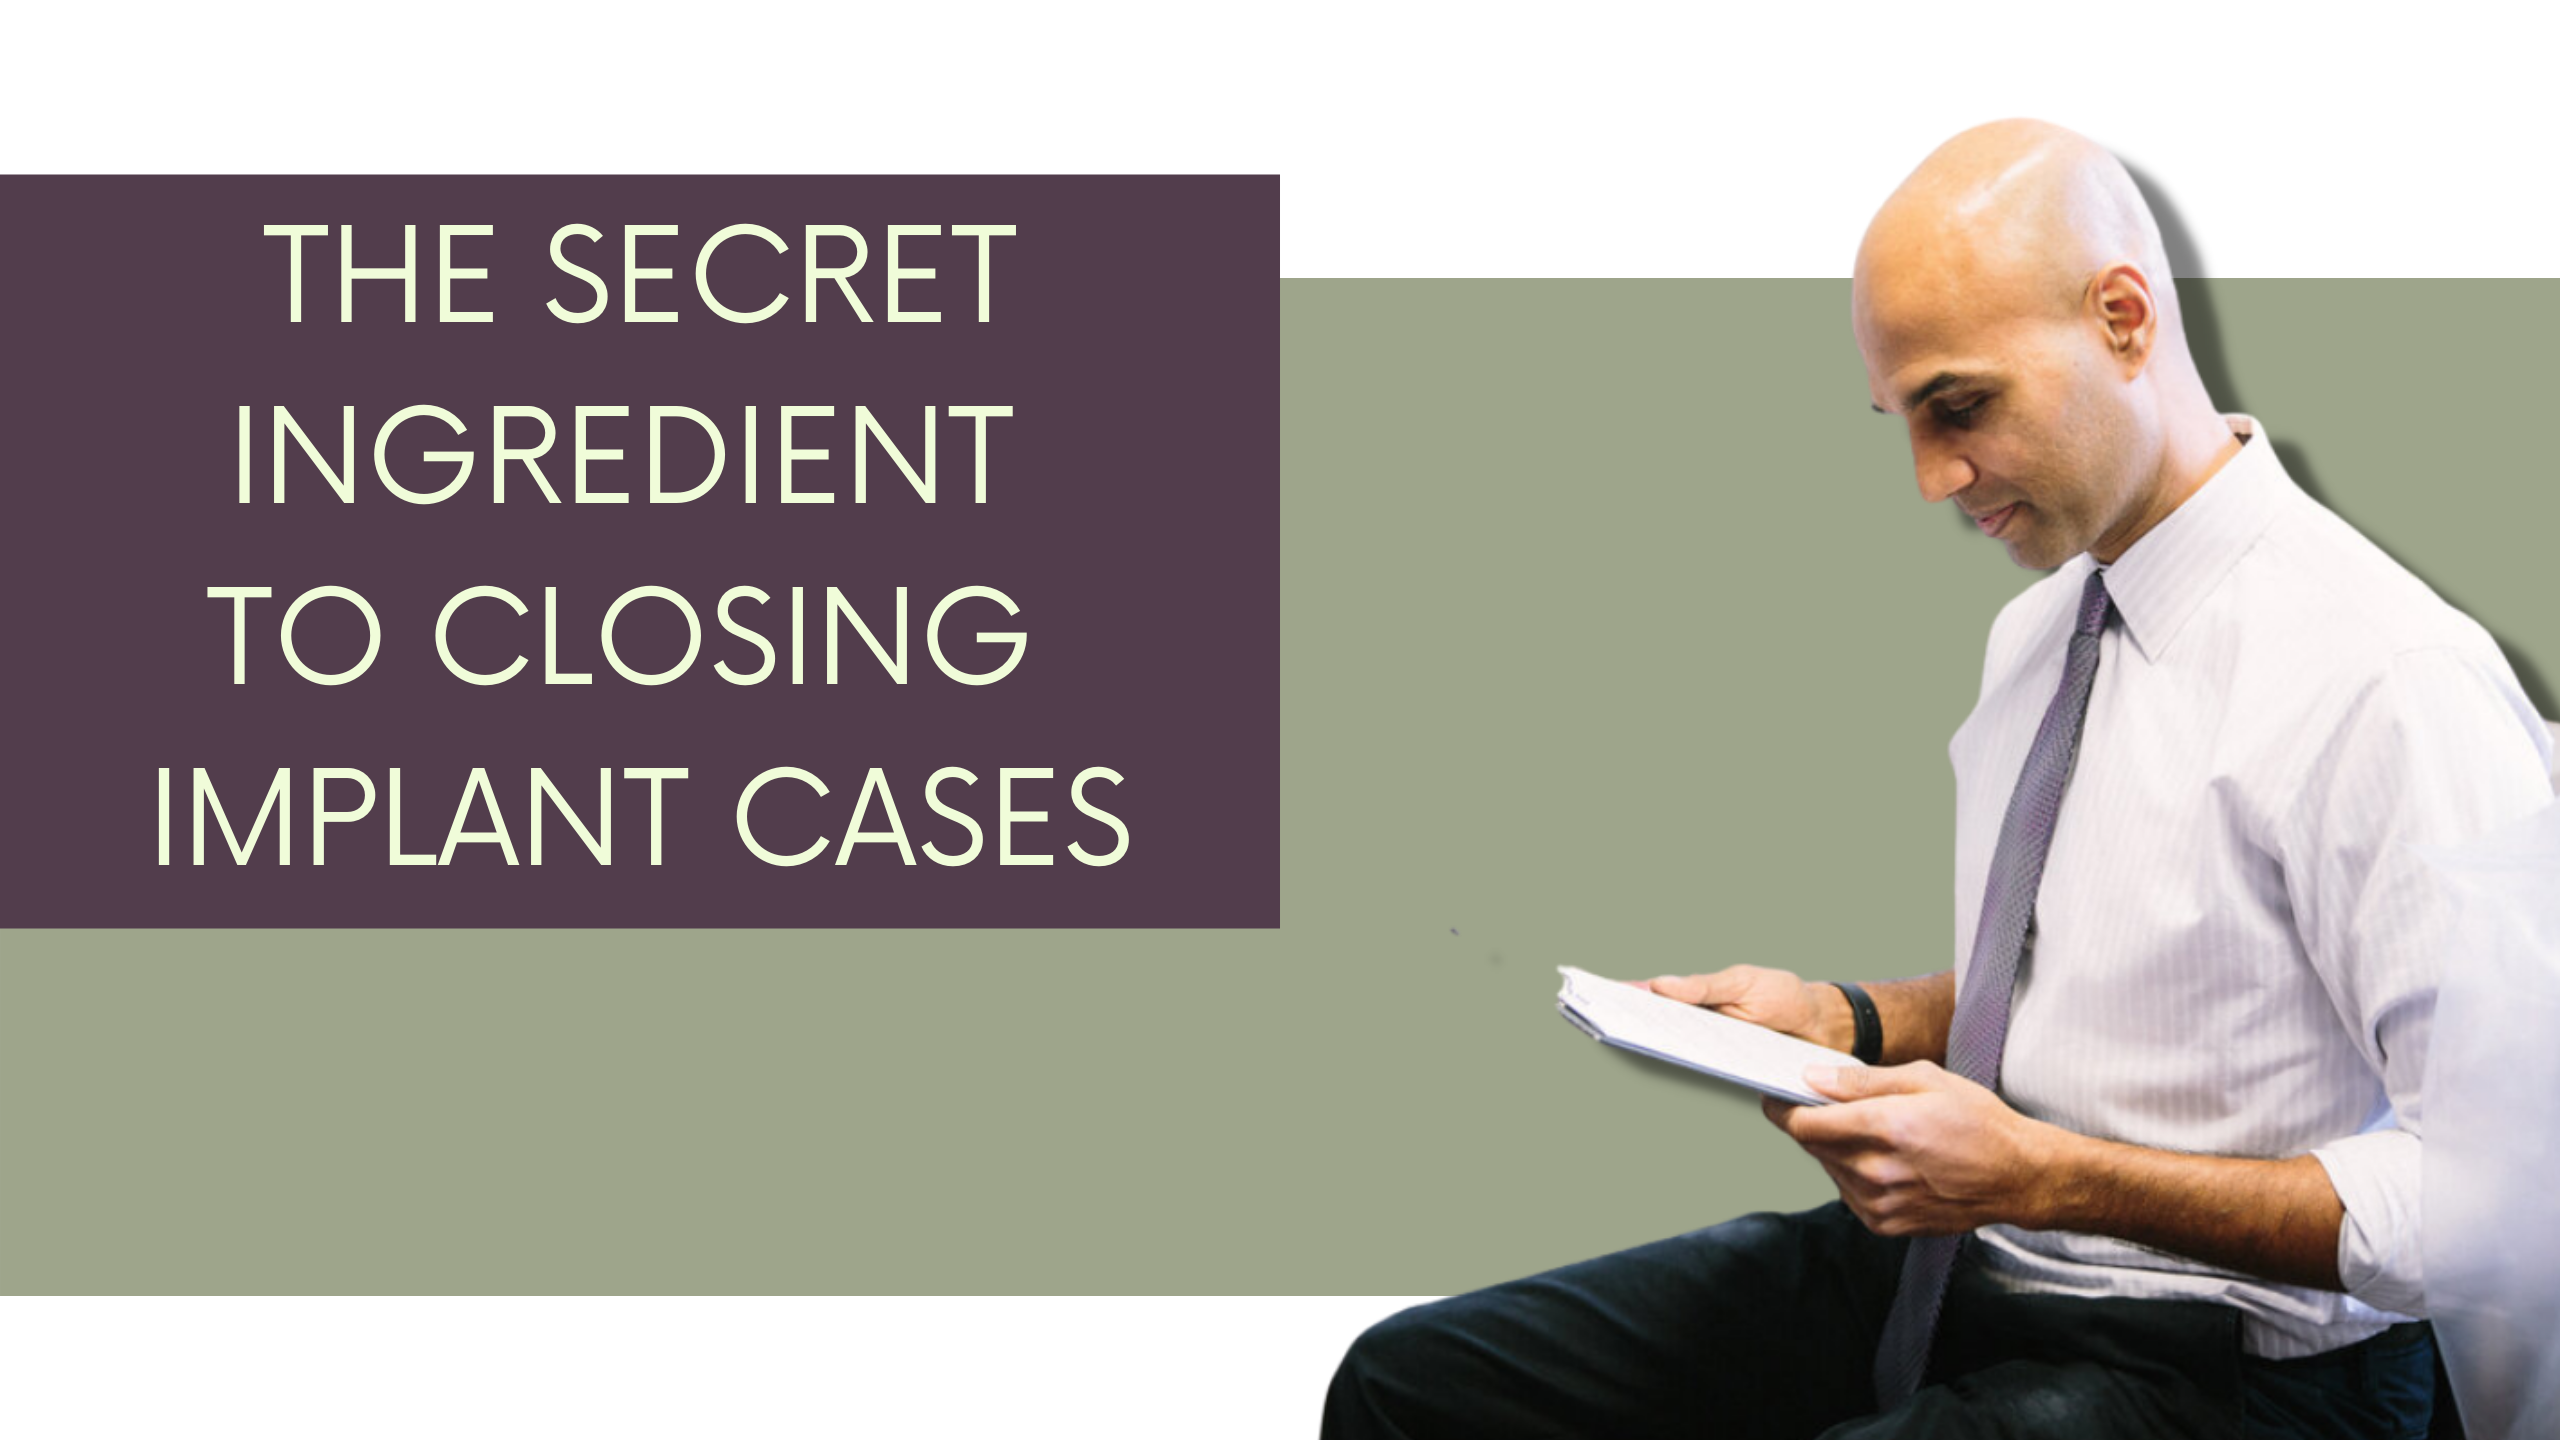 The Secret Ingredient to Closing Implant Cases